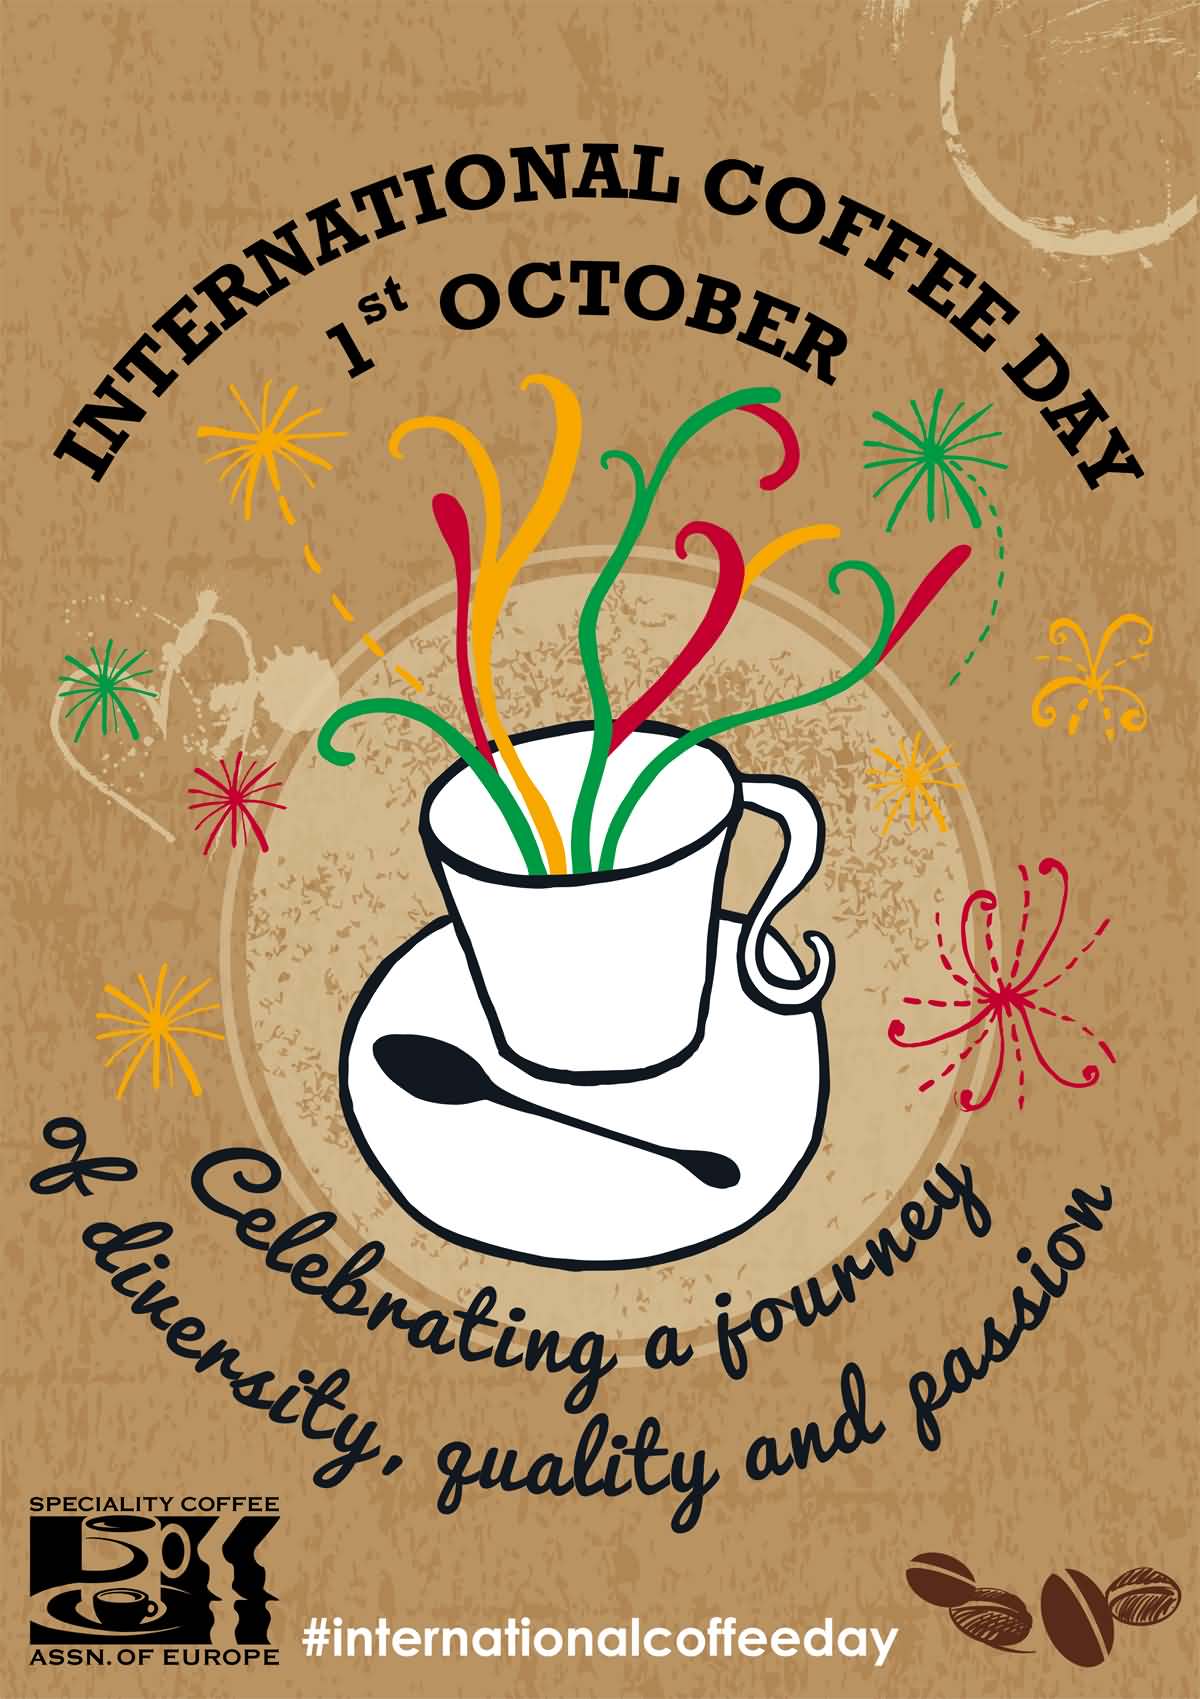 International Coffee Day 1st October Celebrating A Journey Of Diversity, Quality And Passion Greeting Card